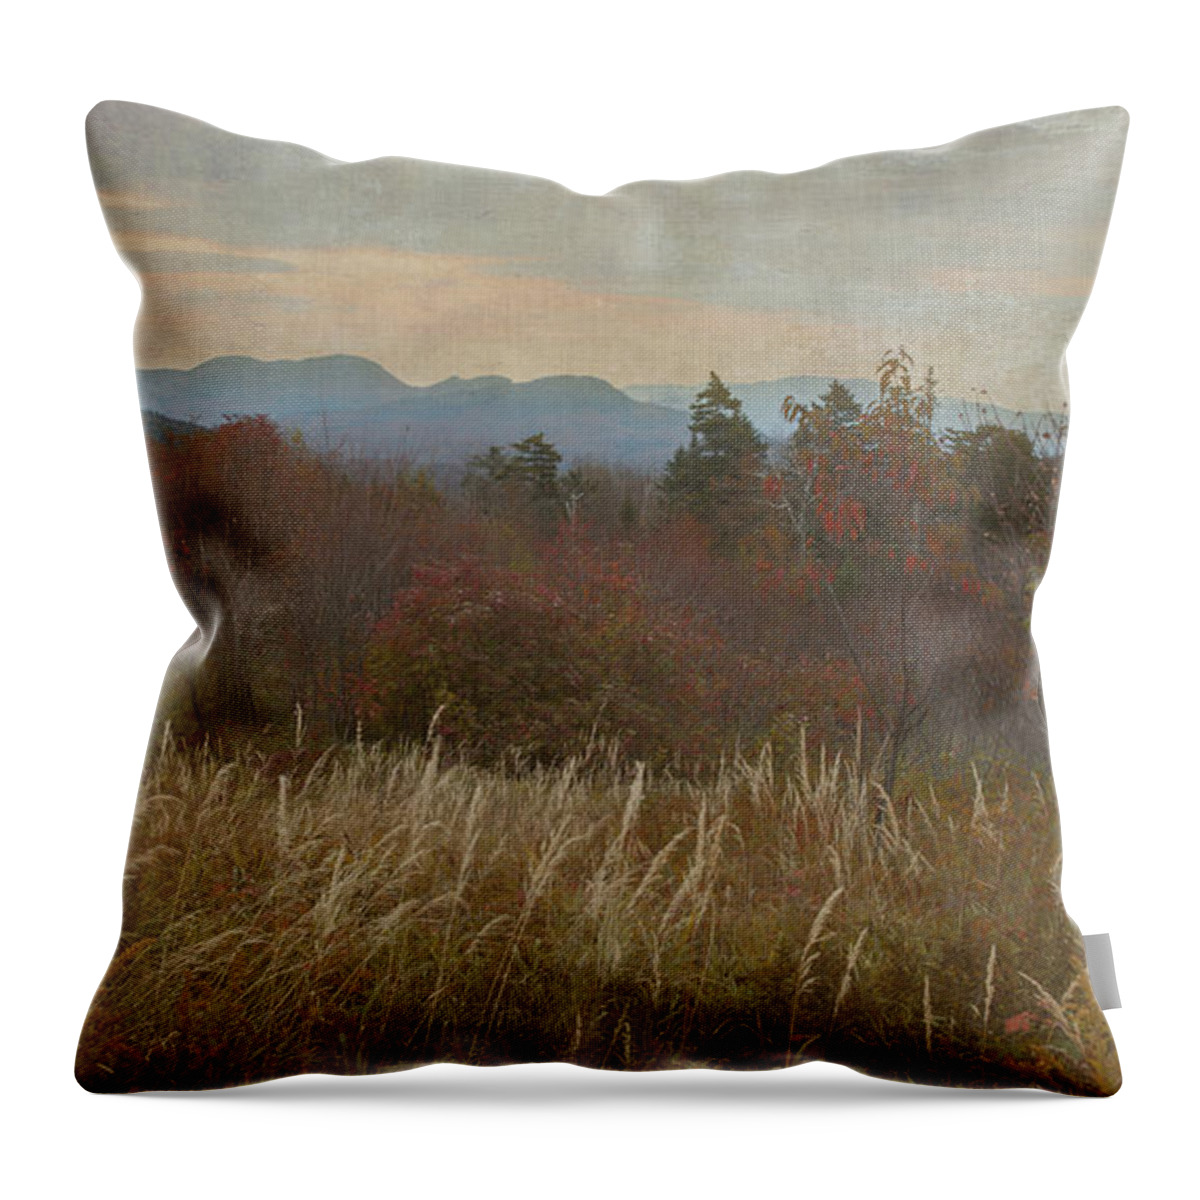 New England Throw Pillow featuring the photograph White Mountains Sunset by Jean-Pierre Ducondi